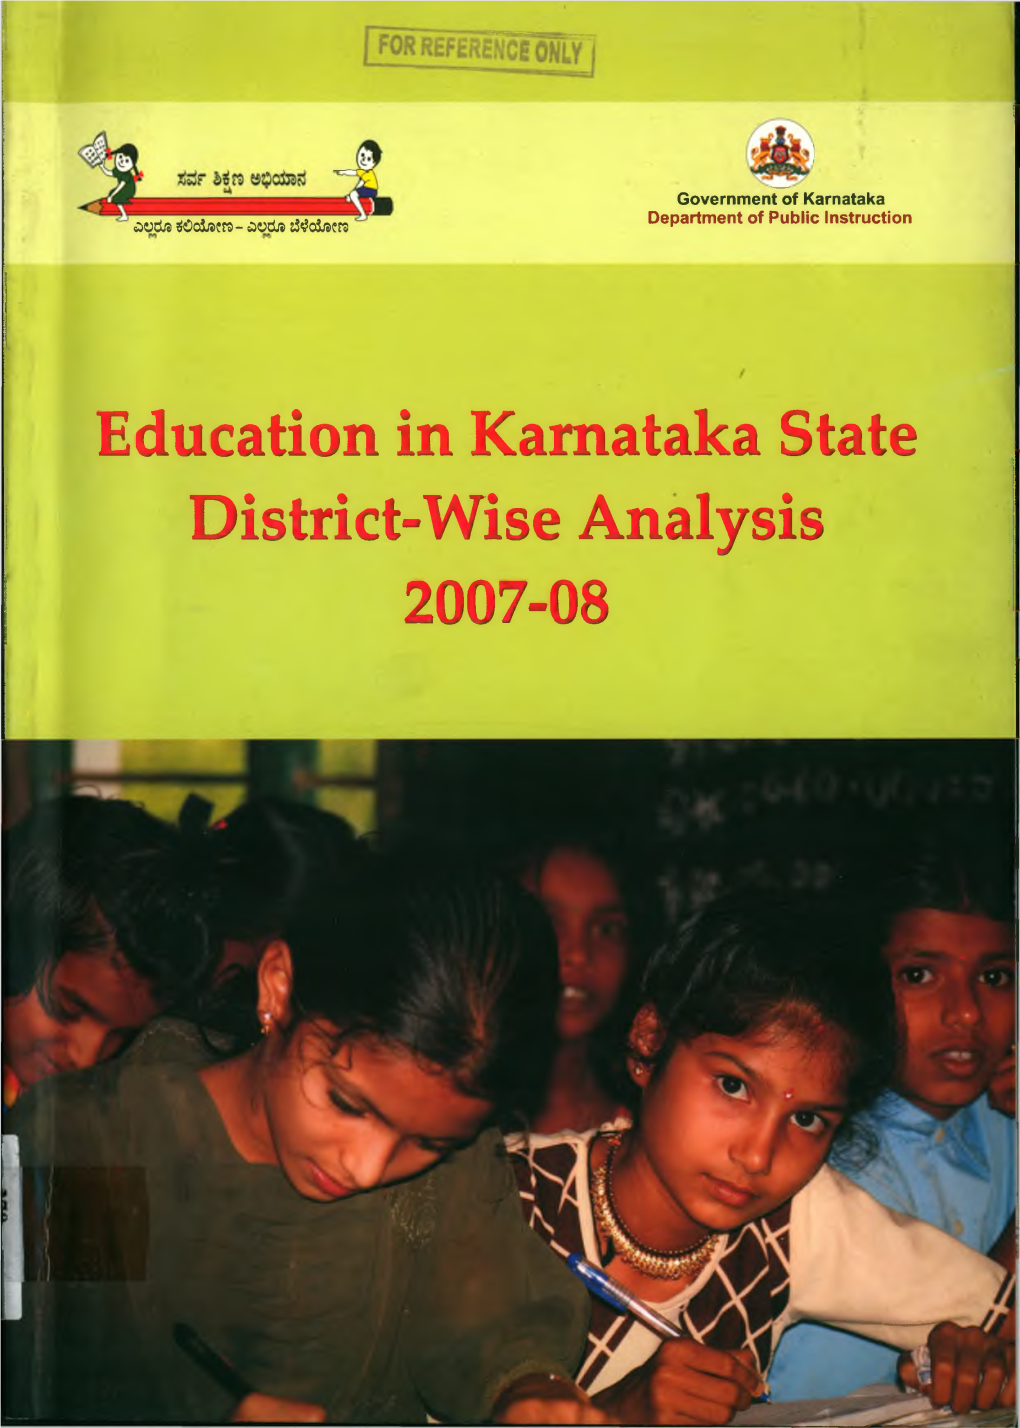 Education in Karnataka State District-Wise Analysis '; 2007-08 for REFERENCE ONLY